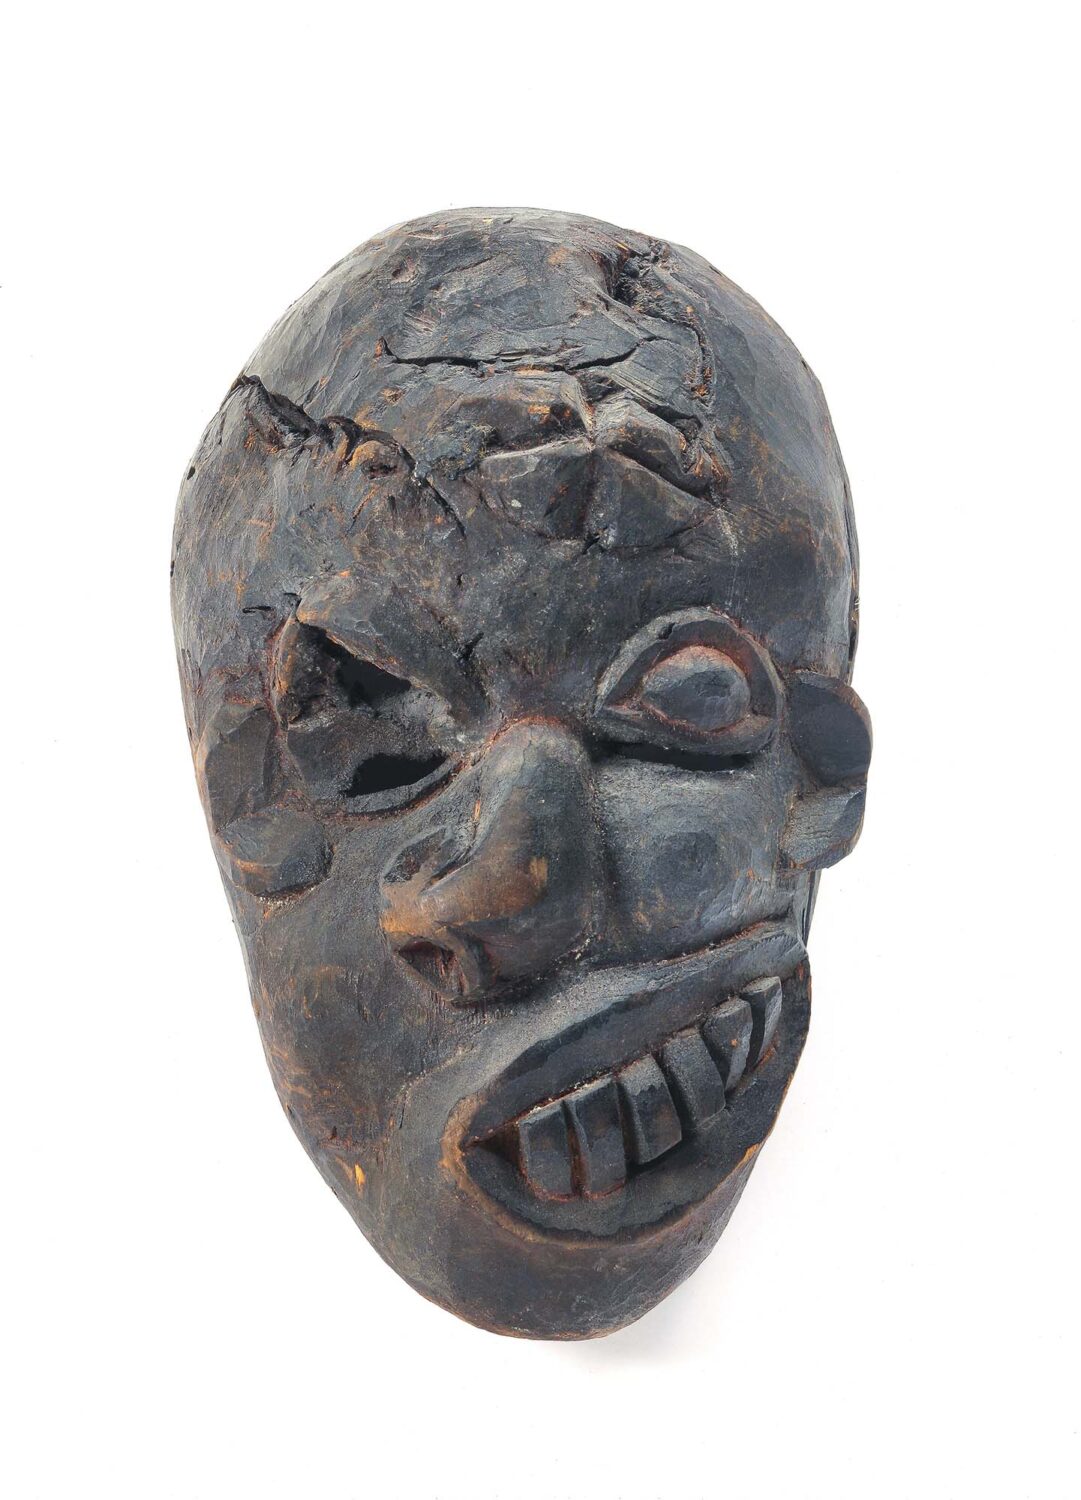 thumbnail of Okoroshi Ojo mask with skewed features.